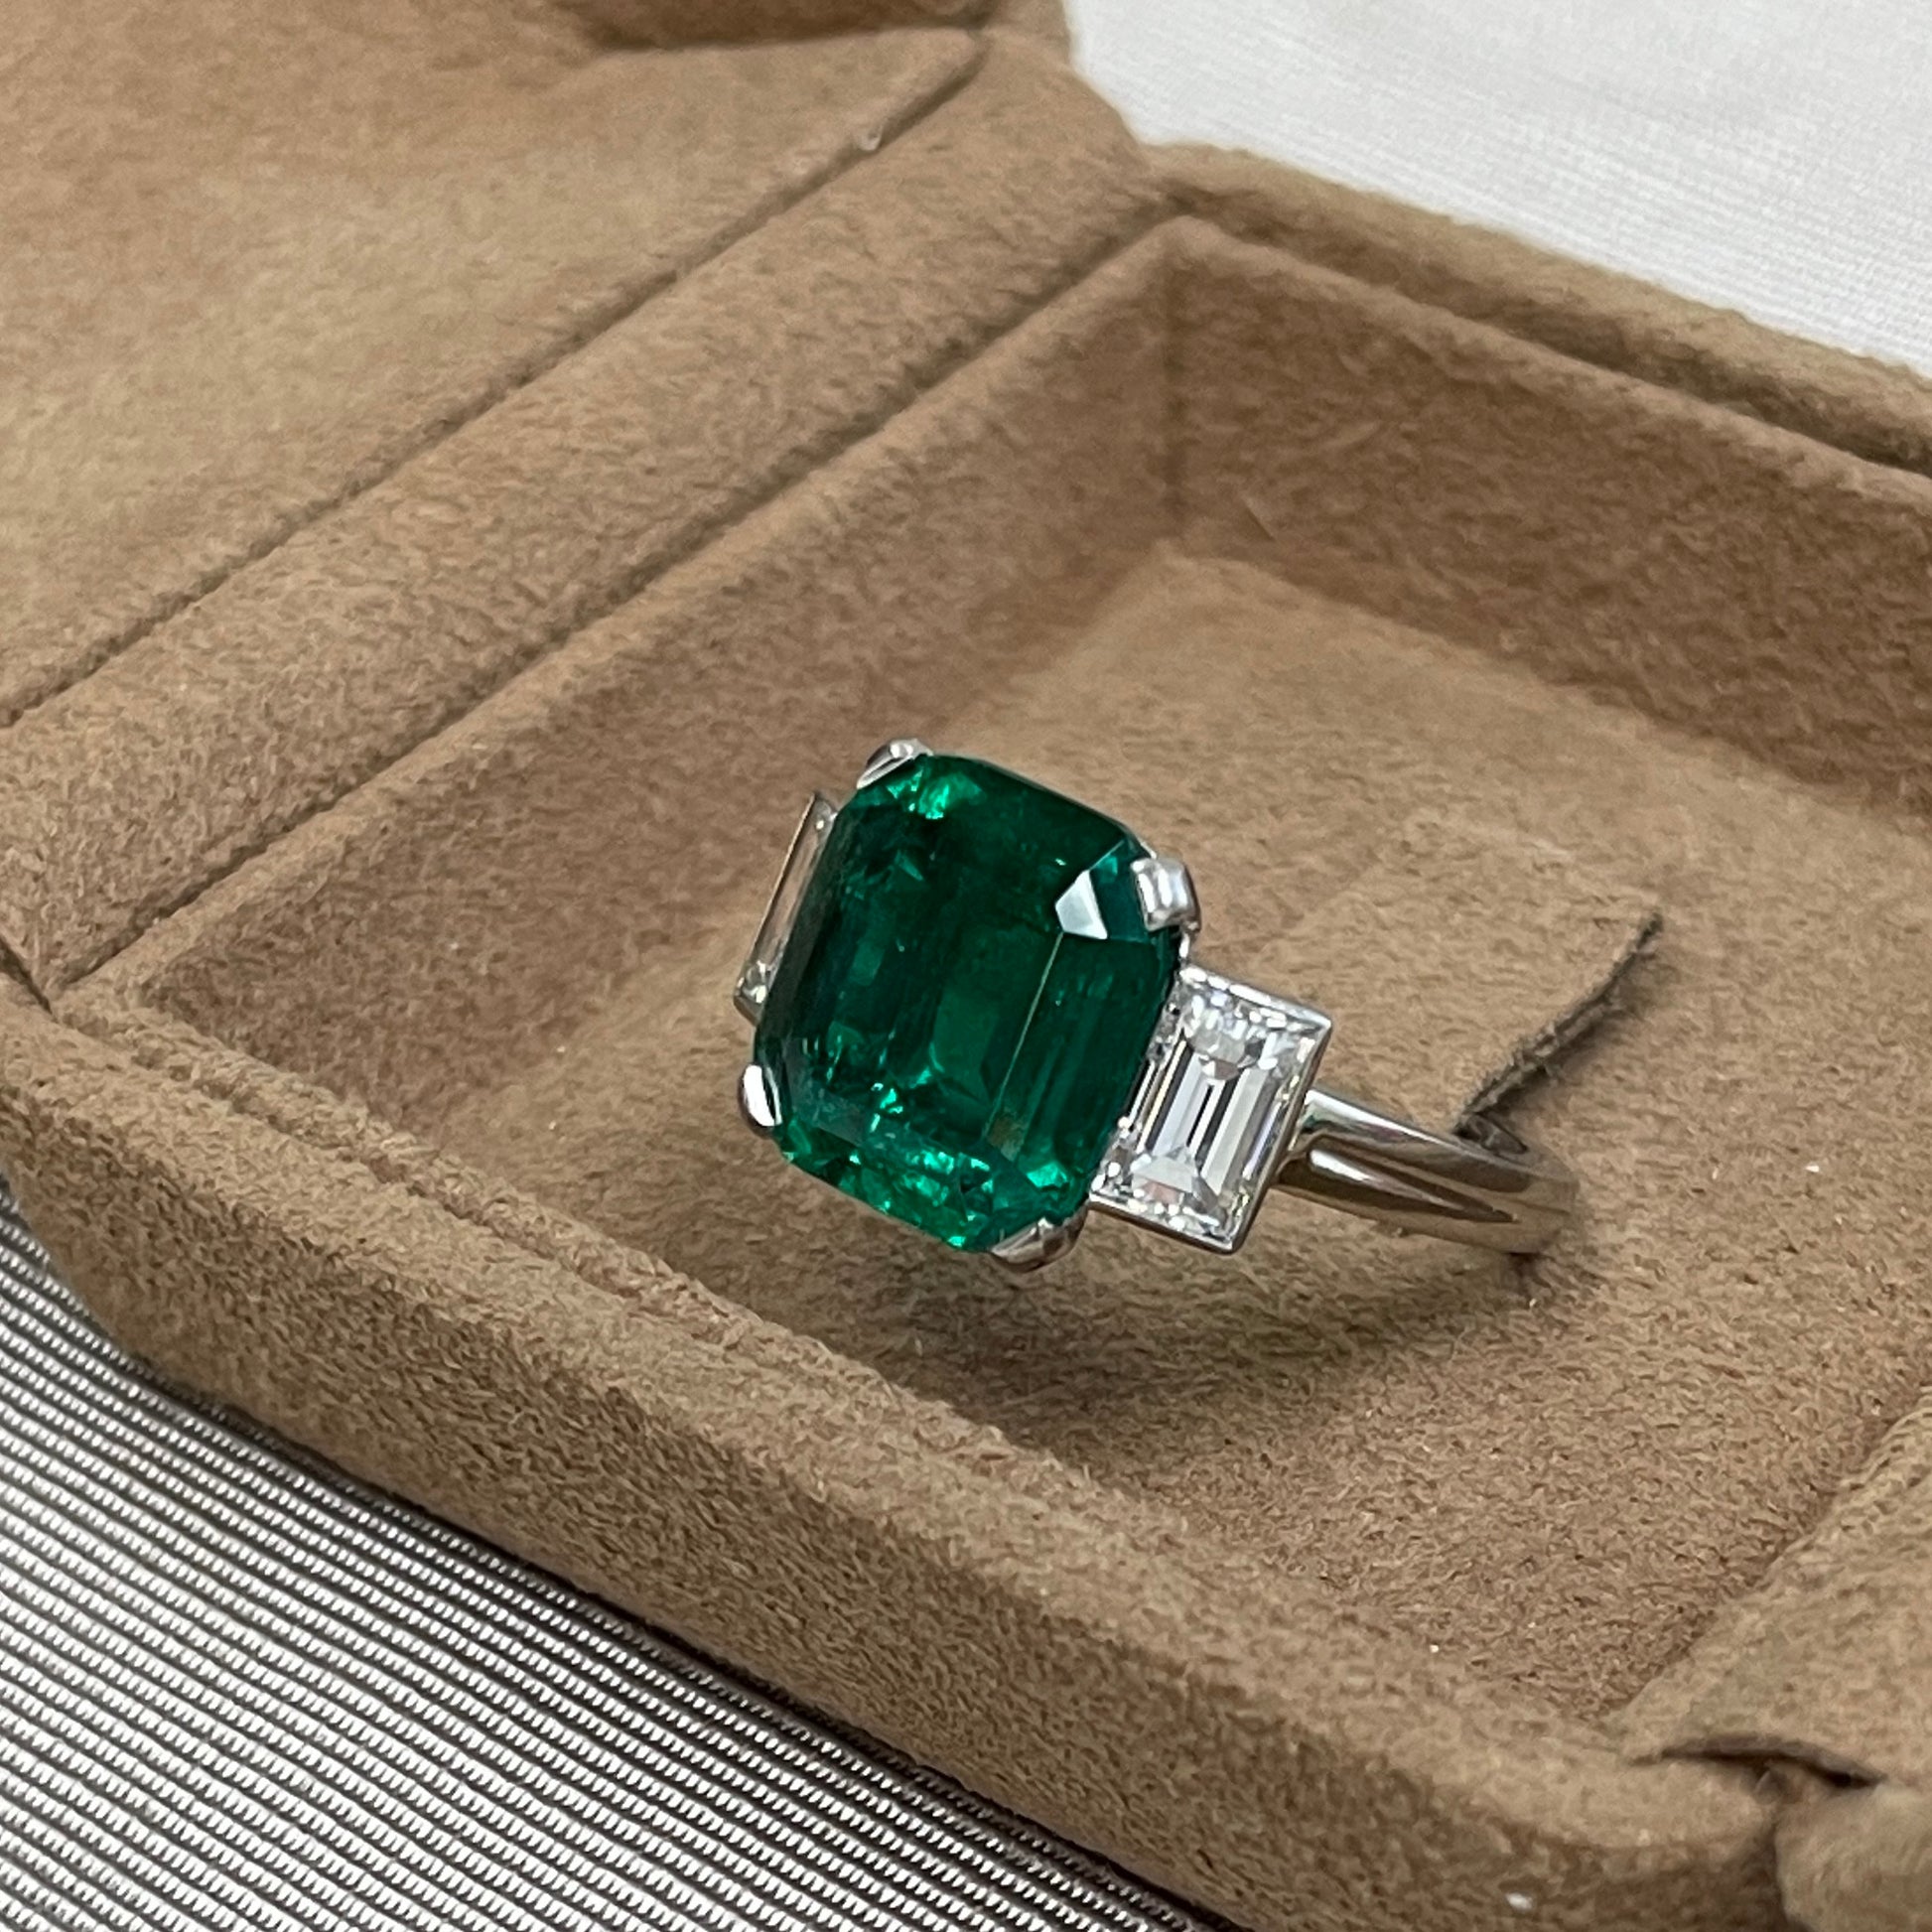 Post-1980s Platinum Colombian Emerald & Diamond Ring front view in jewelry box